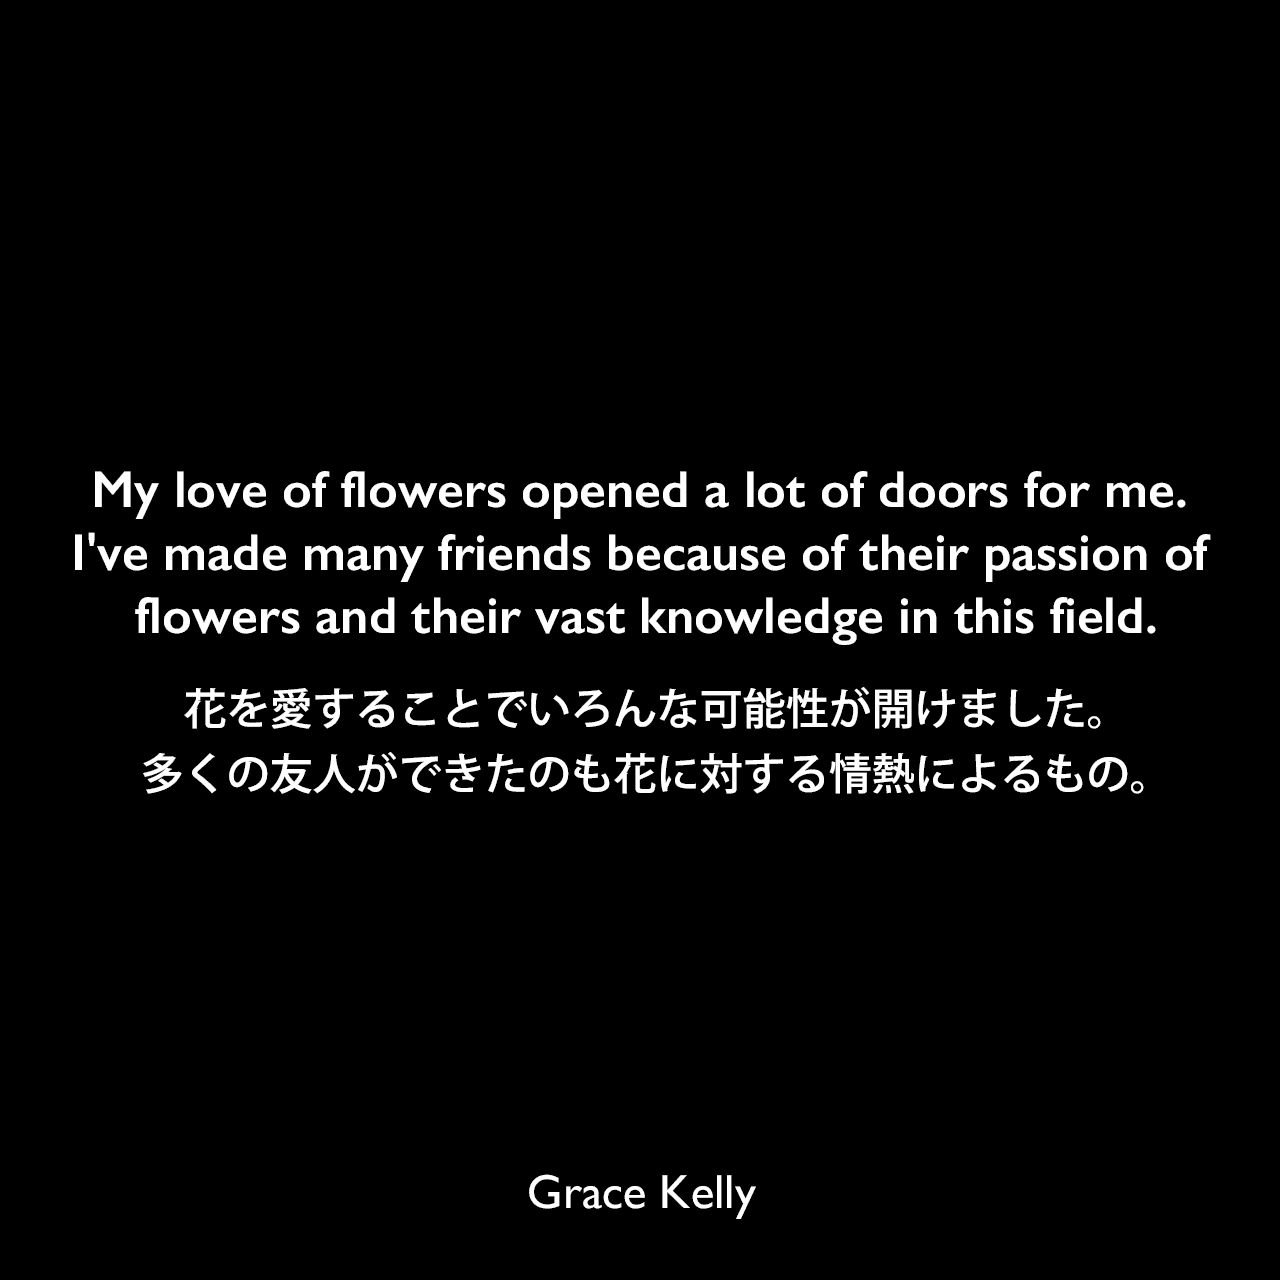 My love of flowers opened a lot of doors for me. I've made many friends because of their passion of flowers and their vast knowledge in this field.花を愛することでいろんな可能性が開けました。多くの友人ができたのも花に対する情熱によるもの。Grace Kelly